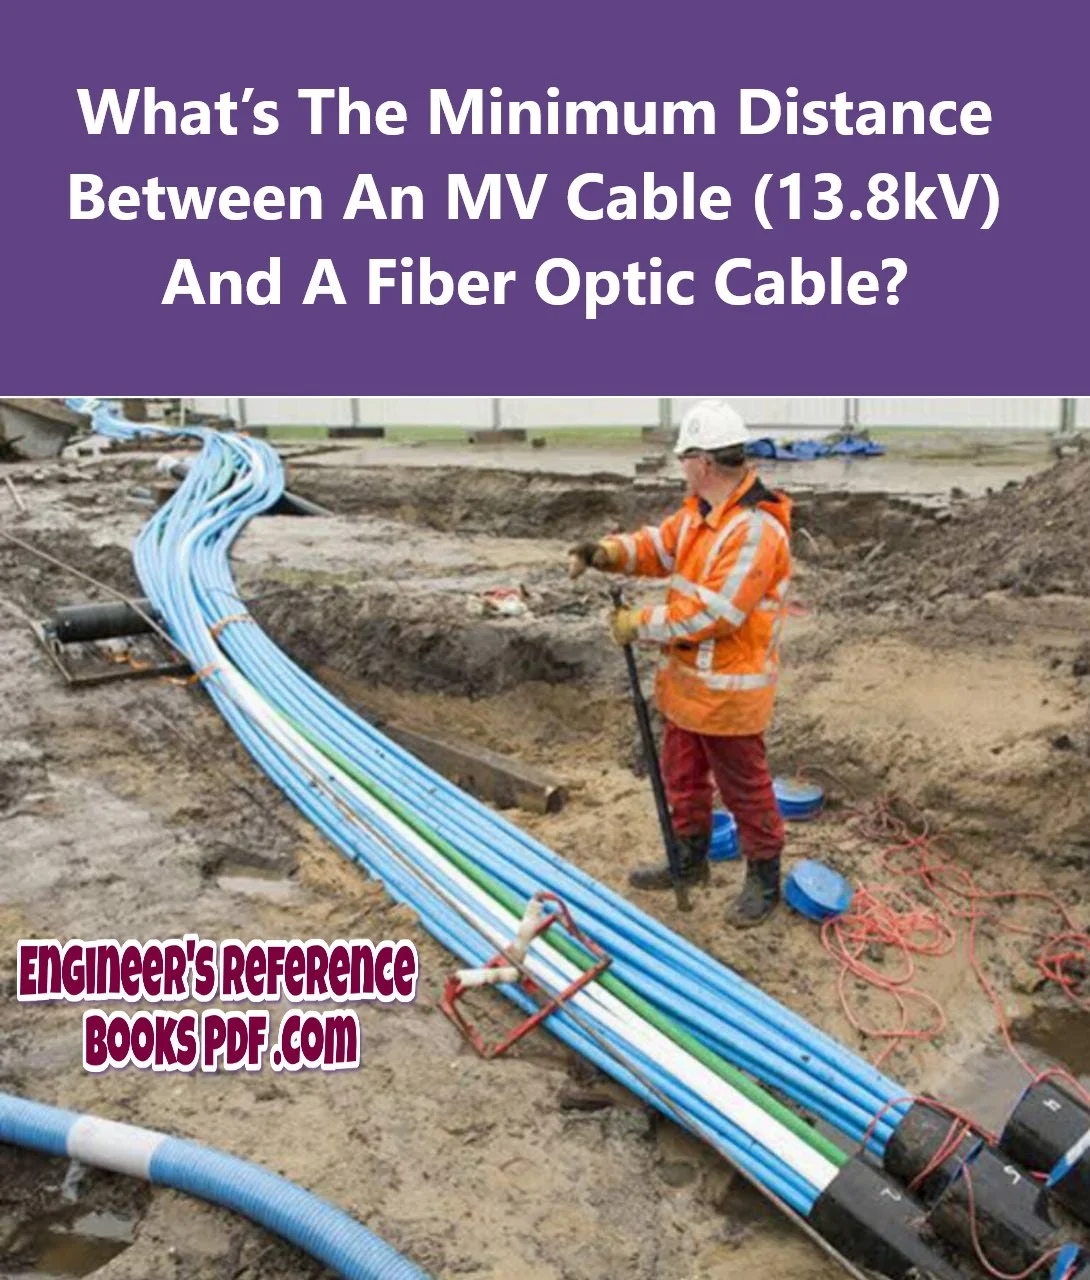 What’s The Minimum Distance Between An MV Cable (13.8kV) And A Fiber Optic Cable?